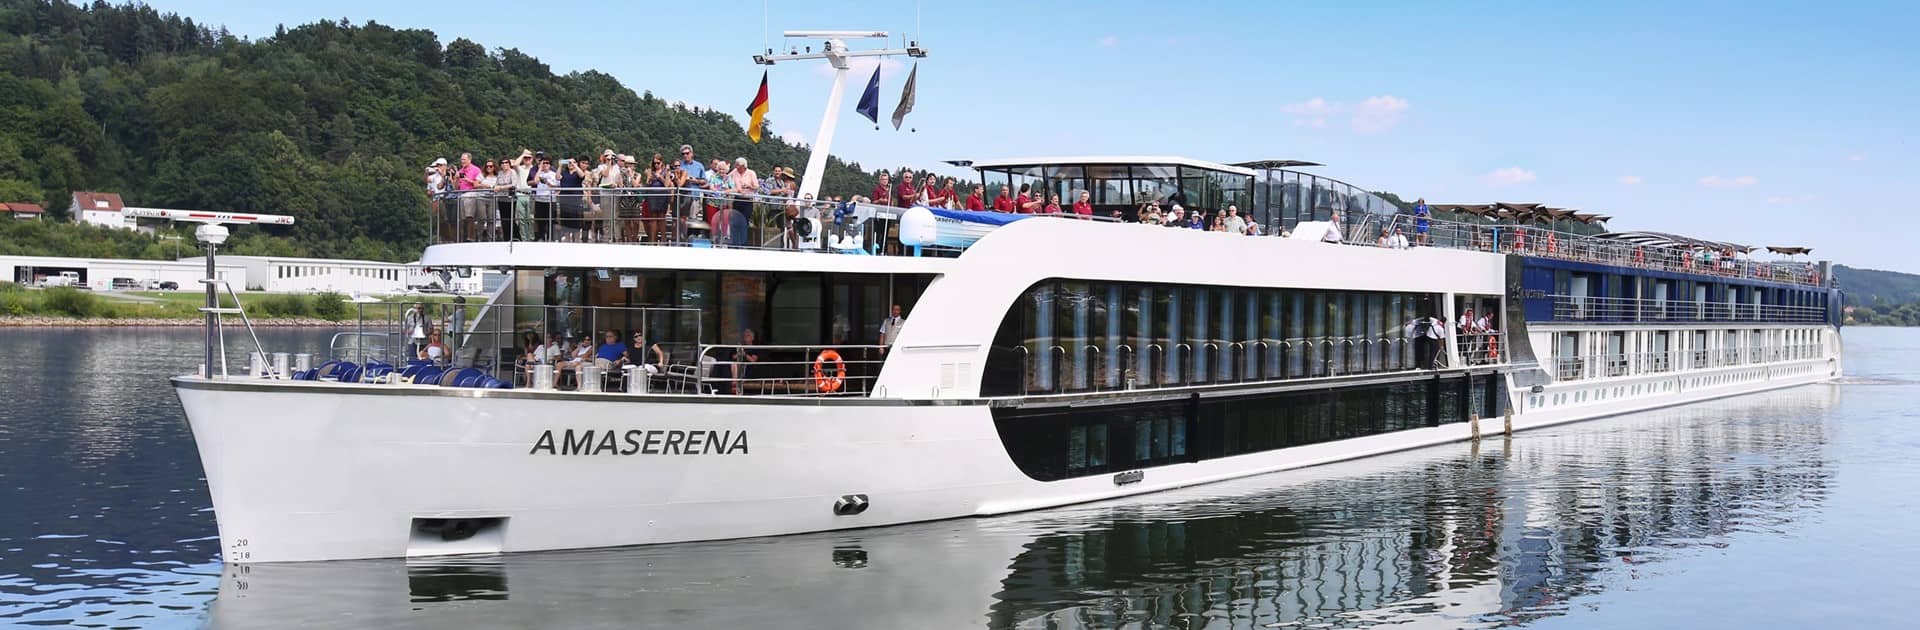 „average passenger of these cruise ships pay locally 6 euro per day ” (kép forrása: https://www.amawaterways.com/ships/amalea-river-cruise-ship )